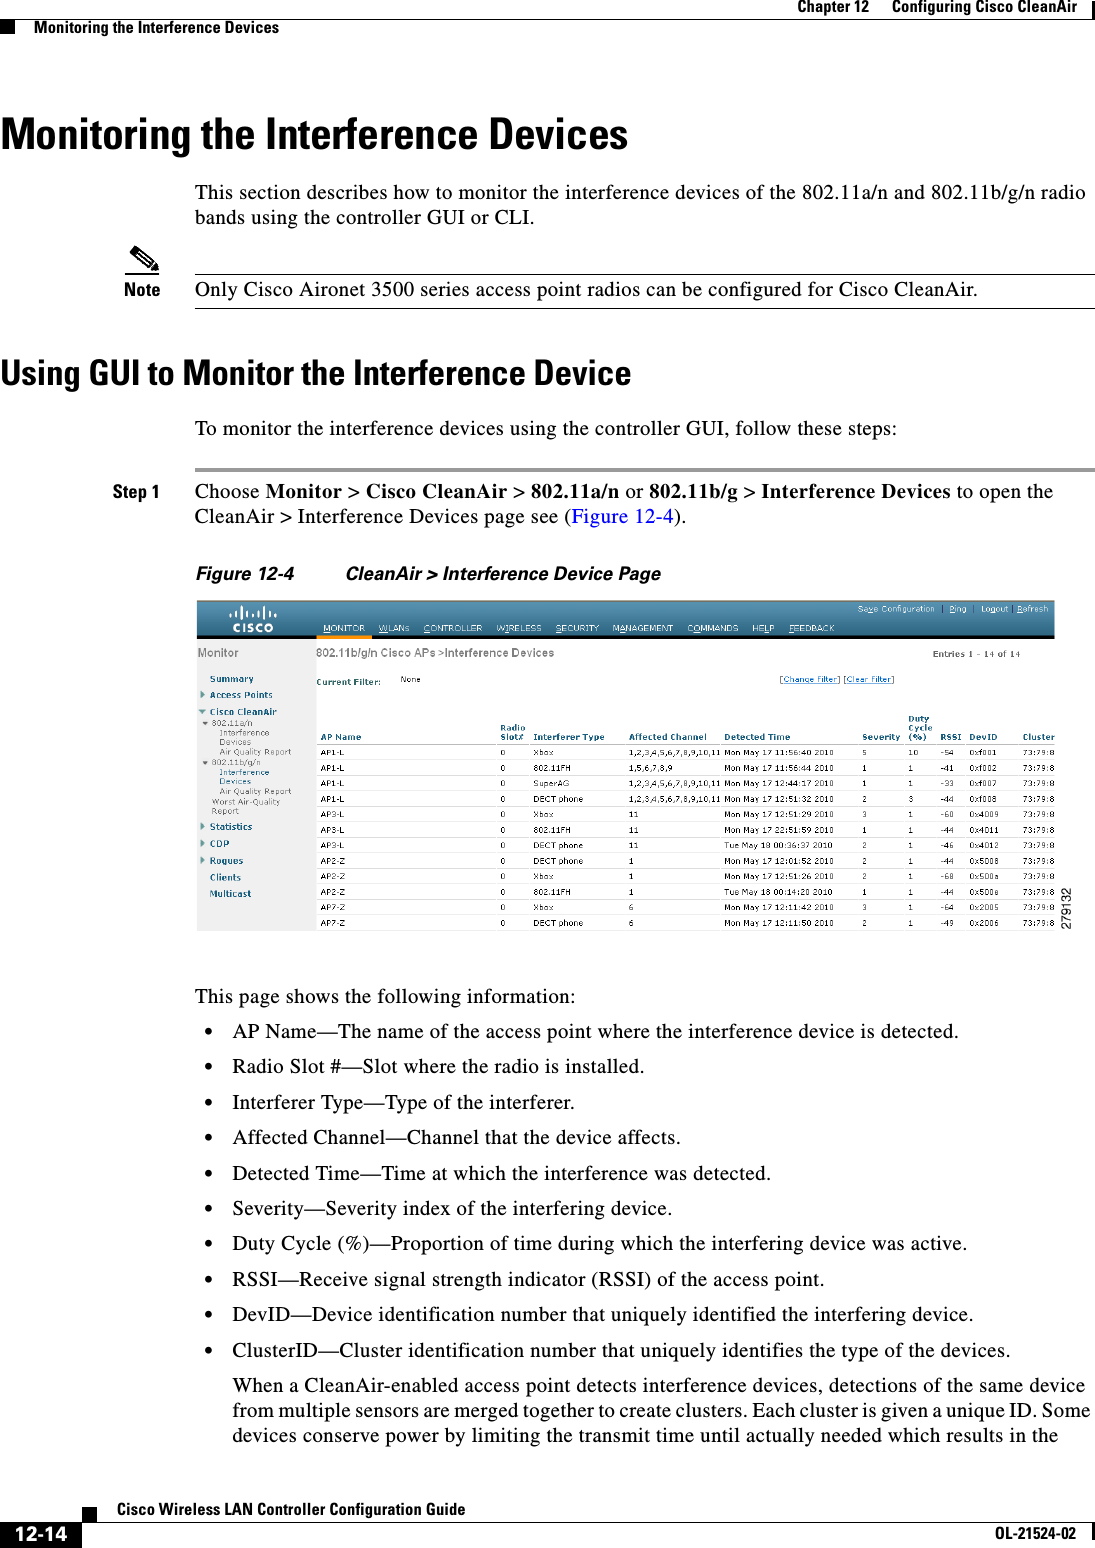  12-14Cisco Wireless LAN Controller Configuration GuideOL-21524-02Chapter 12      Configuring Cisco CleanAirMonitoring the Interference DevicesMonitoring the Interference DevicesThis section describes how to monitor the interference devices of the 802.11a/n and 802.11b/g/n radio bands using the controller GUI or CLI.Note Only Cisco Aironet 3500 series access point radios can be configured for Cisco CleanAir.Using GUI to Monitor the Interference DeviceTo monitor the interference devices using the controller GUI, follow these steps:Step 1 Choose Monitor &gt; Cisco CleanAir &gt; 802.11a/n or 802.11b/g &gt; Interference Devices to open the CleanAir &gt; Interference Devices page see (Figure 12-4).Figure 12-4 CleanAir &gt; Interference Device PageThis page shows the following information:  • AP Name—The name of the access point where the interference device is detected.  • Radio Slot #—Slot where the radio is installed.  • Interferer Type—Type of the interferer.  • Affected Channel—Channel that the device affects.  • Detected Time—Time at which the interference was detected.  • Severity—Severity index of the interfering device.  • Duty Cycle (%)—Proportion of time during which the interfering device was active.  • RSSI—Receive signal strength indicator (RSSI) of the access point.  • DevID—Device identification number that uniquely identified the interfering device.  • ClusterID—Cluster identification number that uniquely identifies the type of the devices.When a CleanAir-enabled access point detects interference devices, detections of the same device from multiple sensors are merged together to create clusters. Each cluster is given a unique ID. Some devices conserve power by limiting the transmit time until actually needed which results in the 